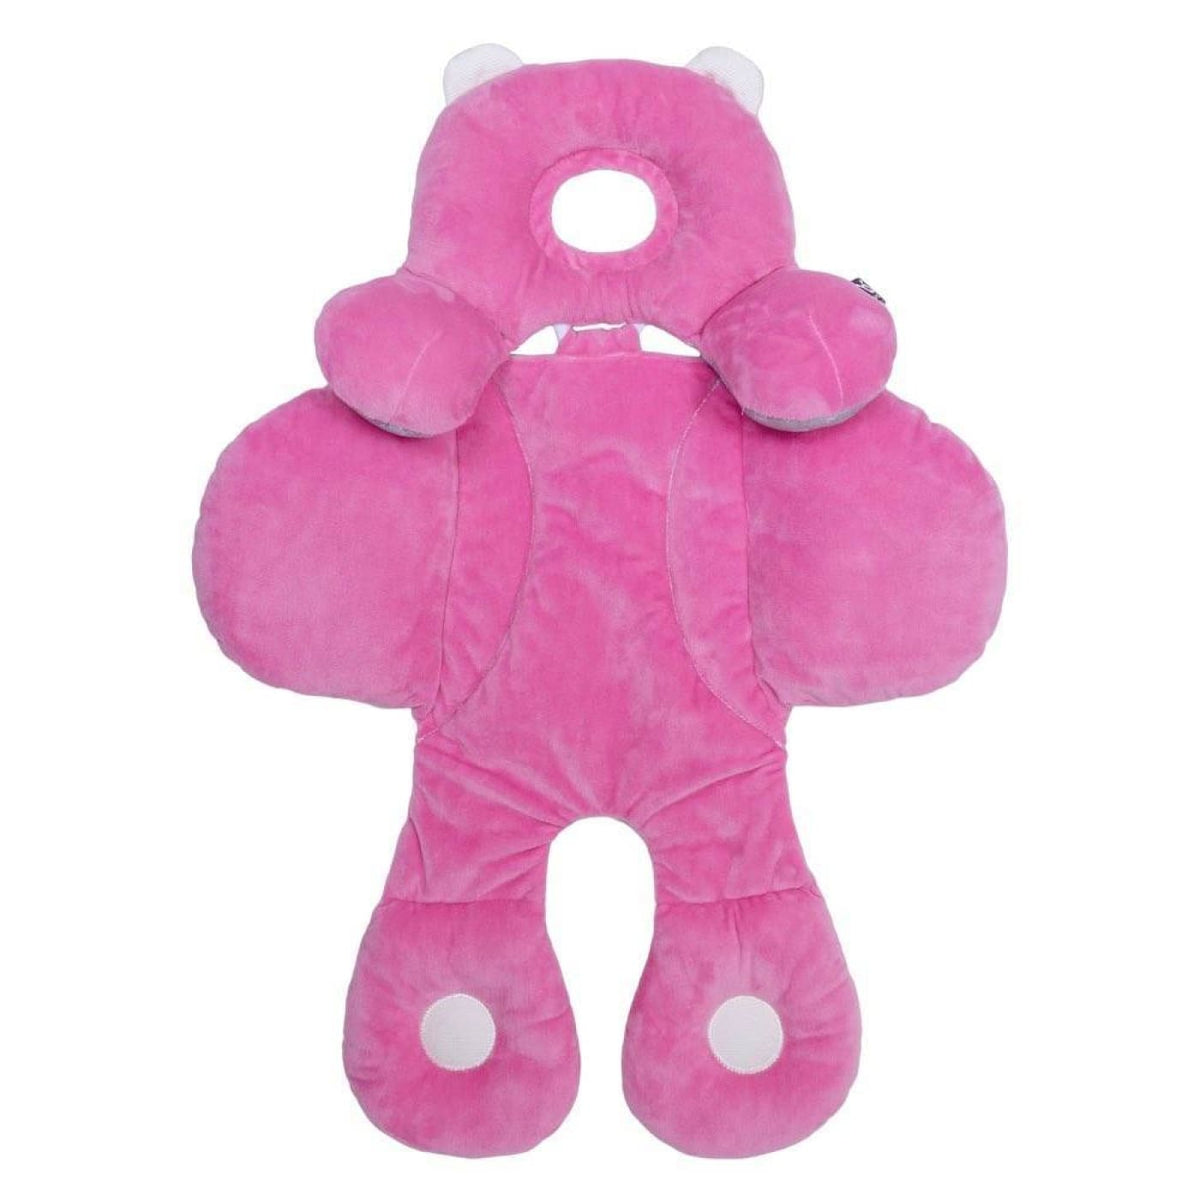 Benbat Reversible Body Support - Pink 0-12M - CAR SEATS - HEAD SUPPORTS/HARNESS COVERS